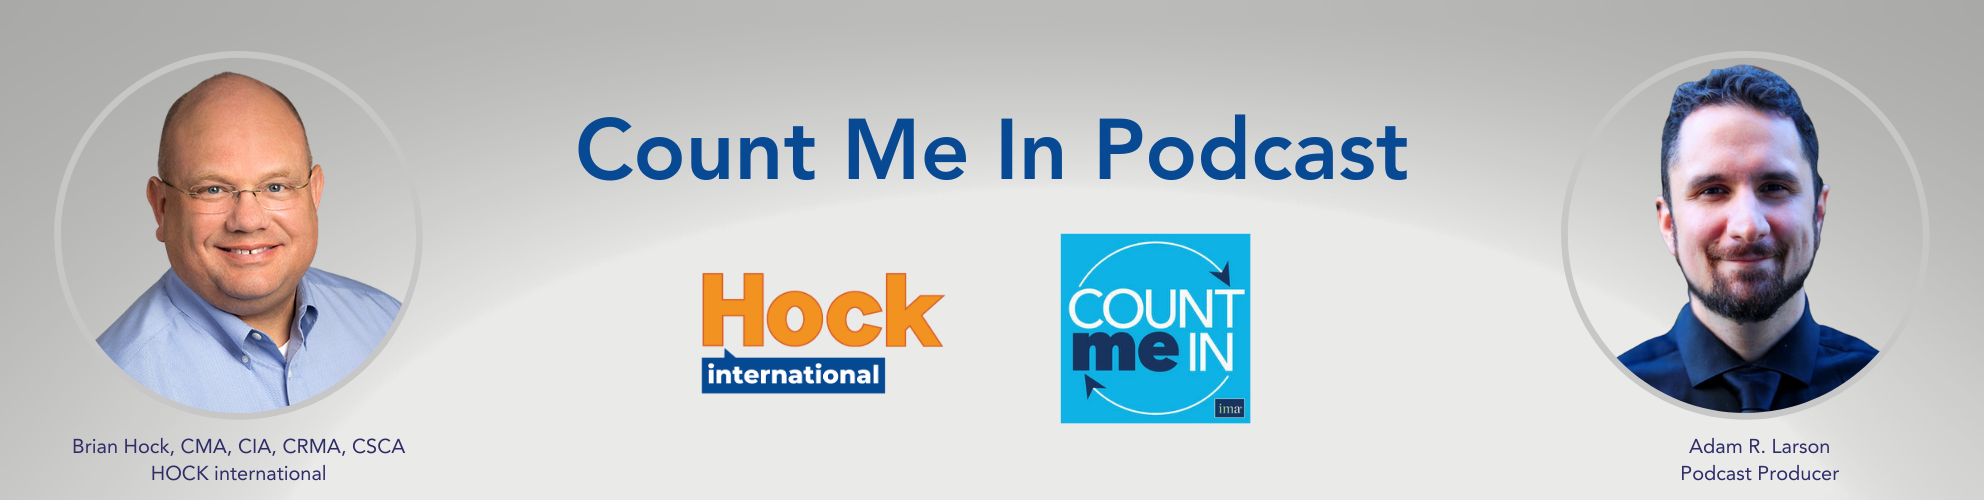 Count Me In Podcast